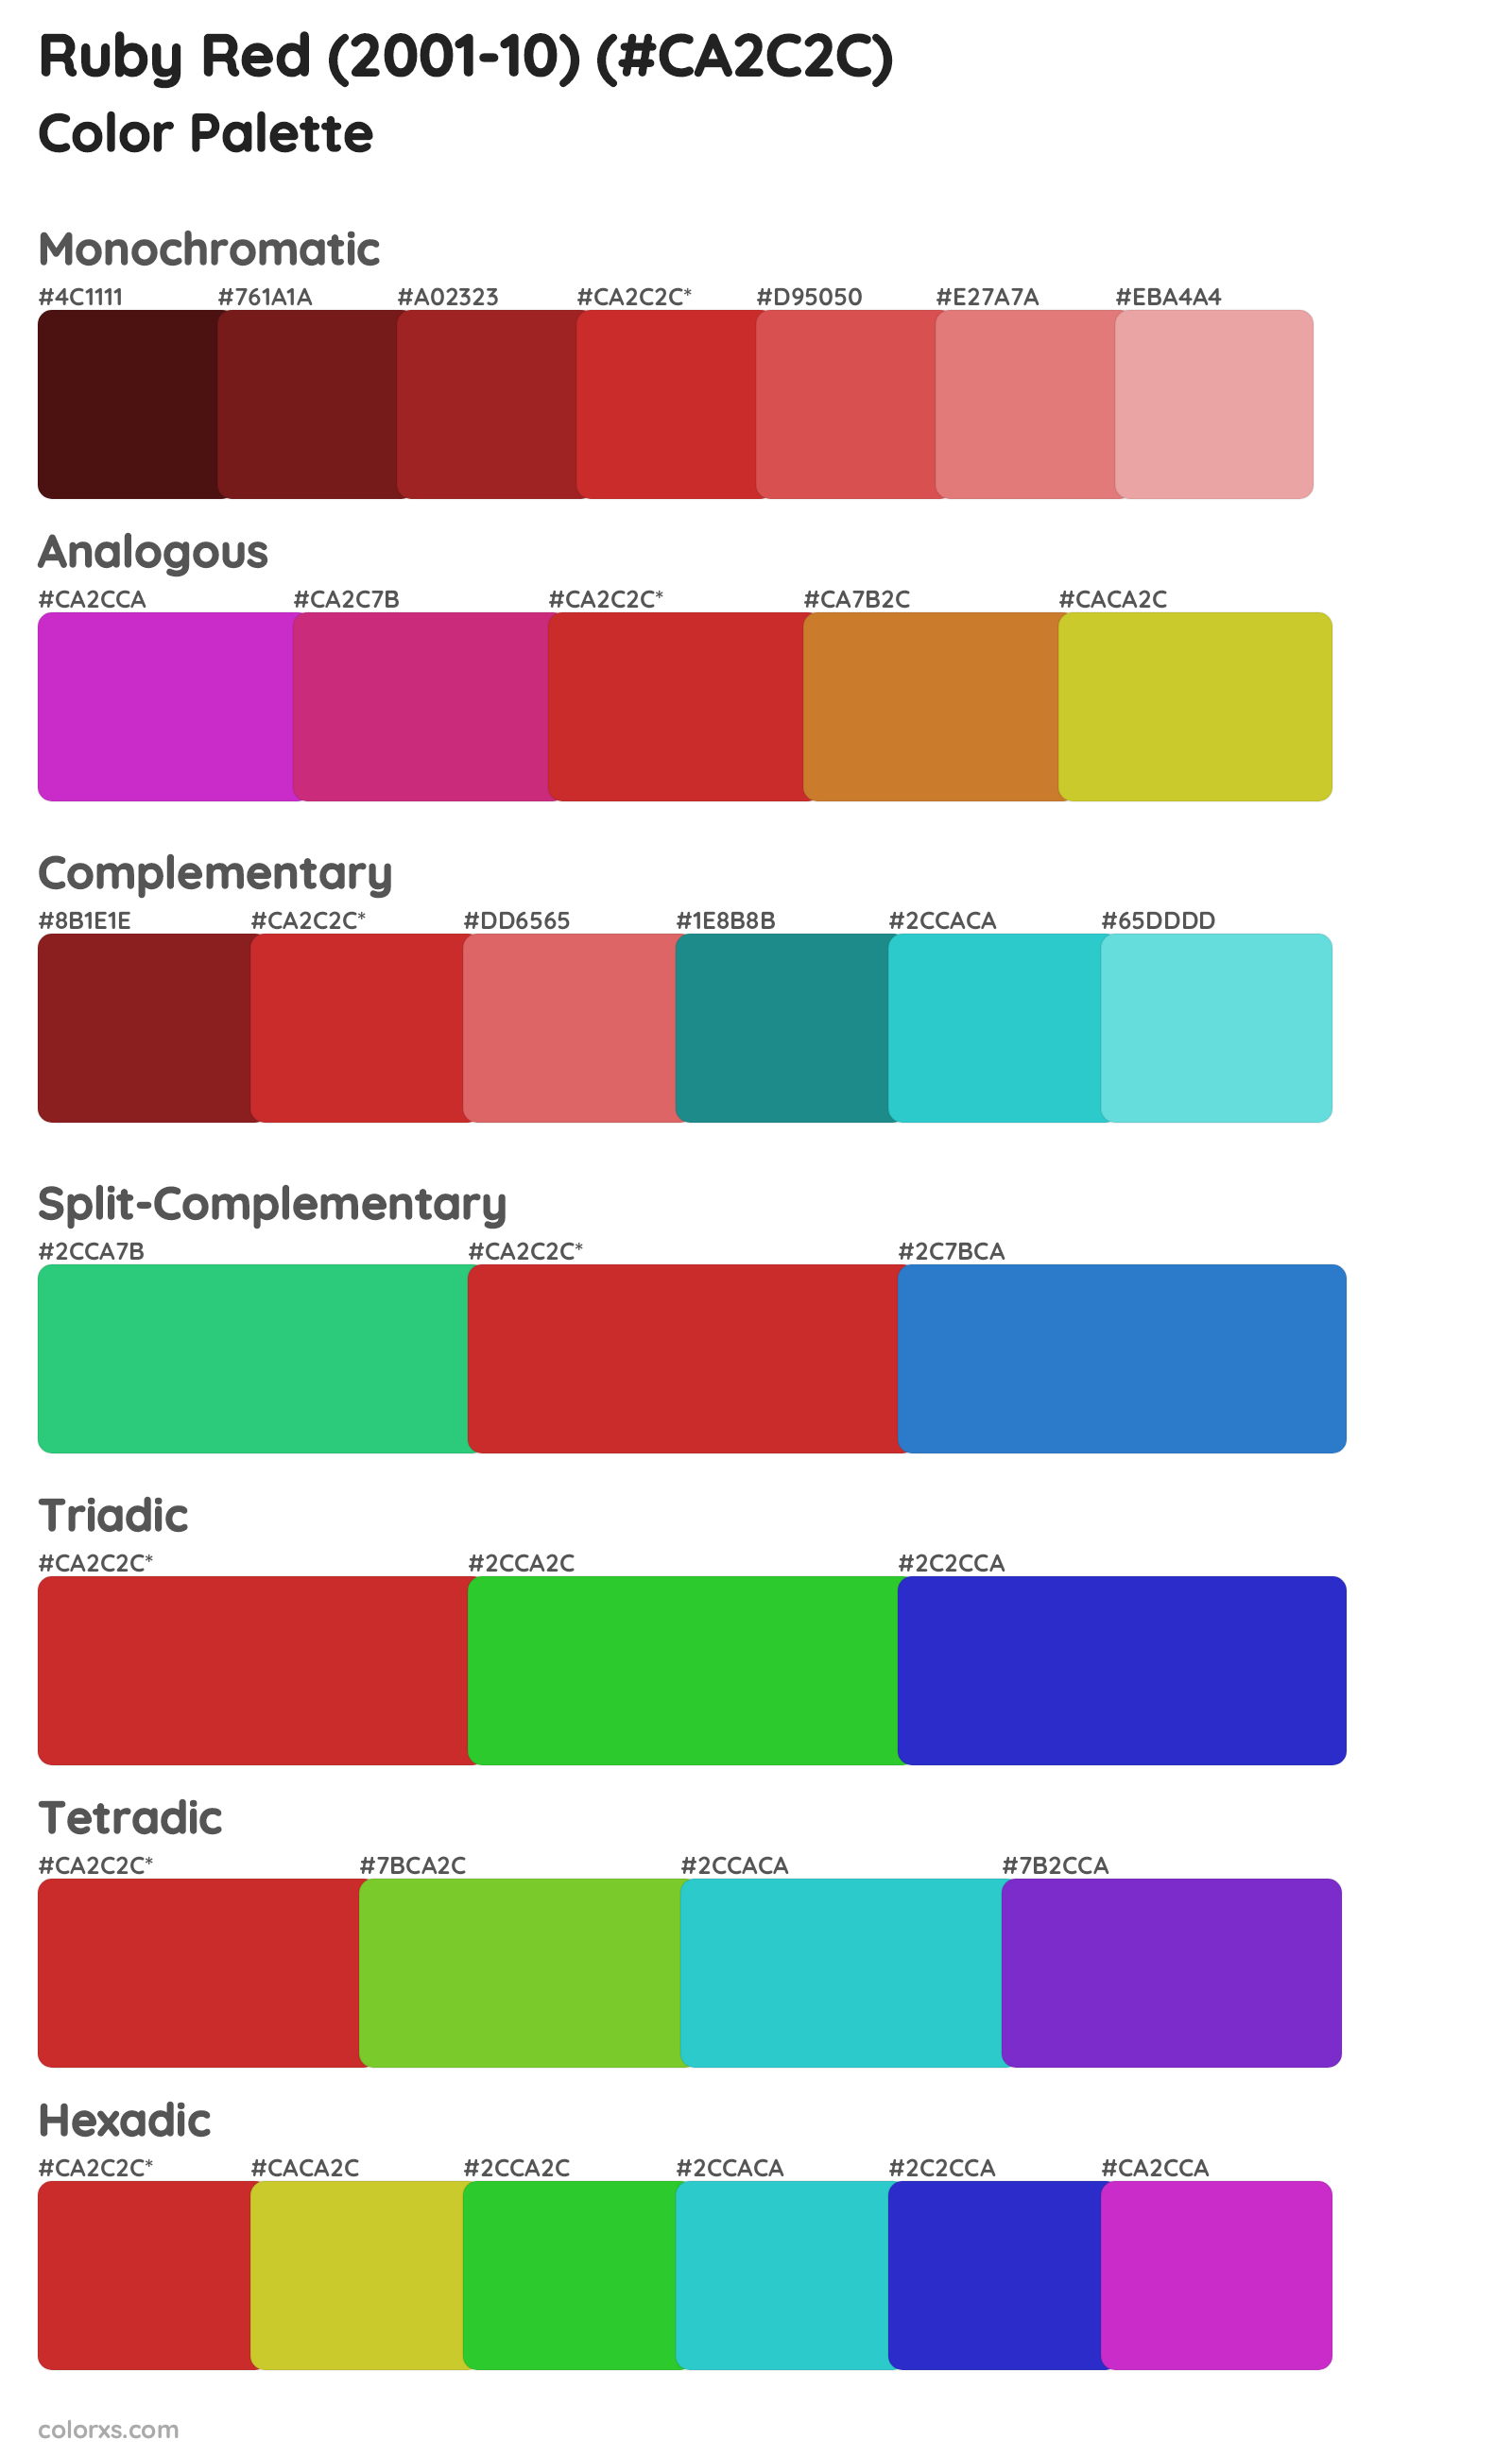 Ruby Red (2001-10) Color Scheme Palettes